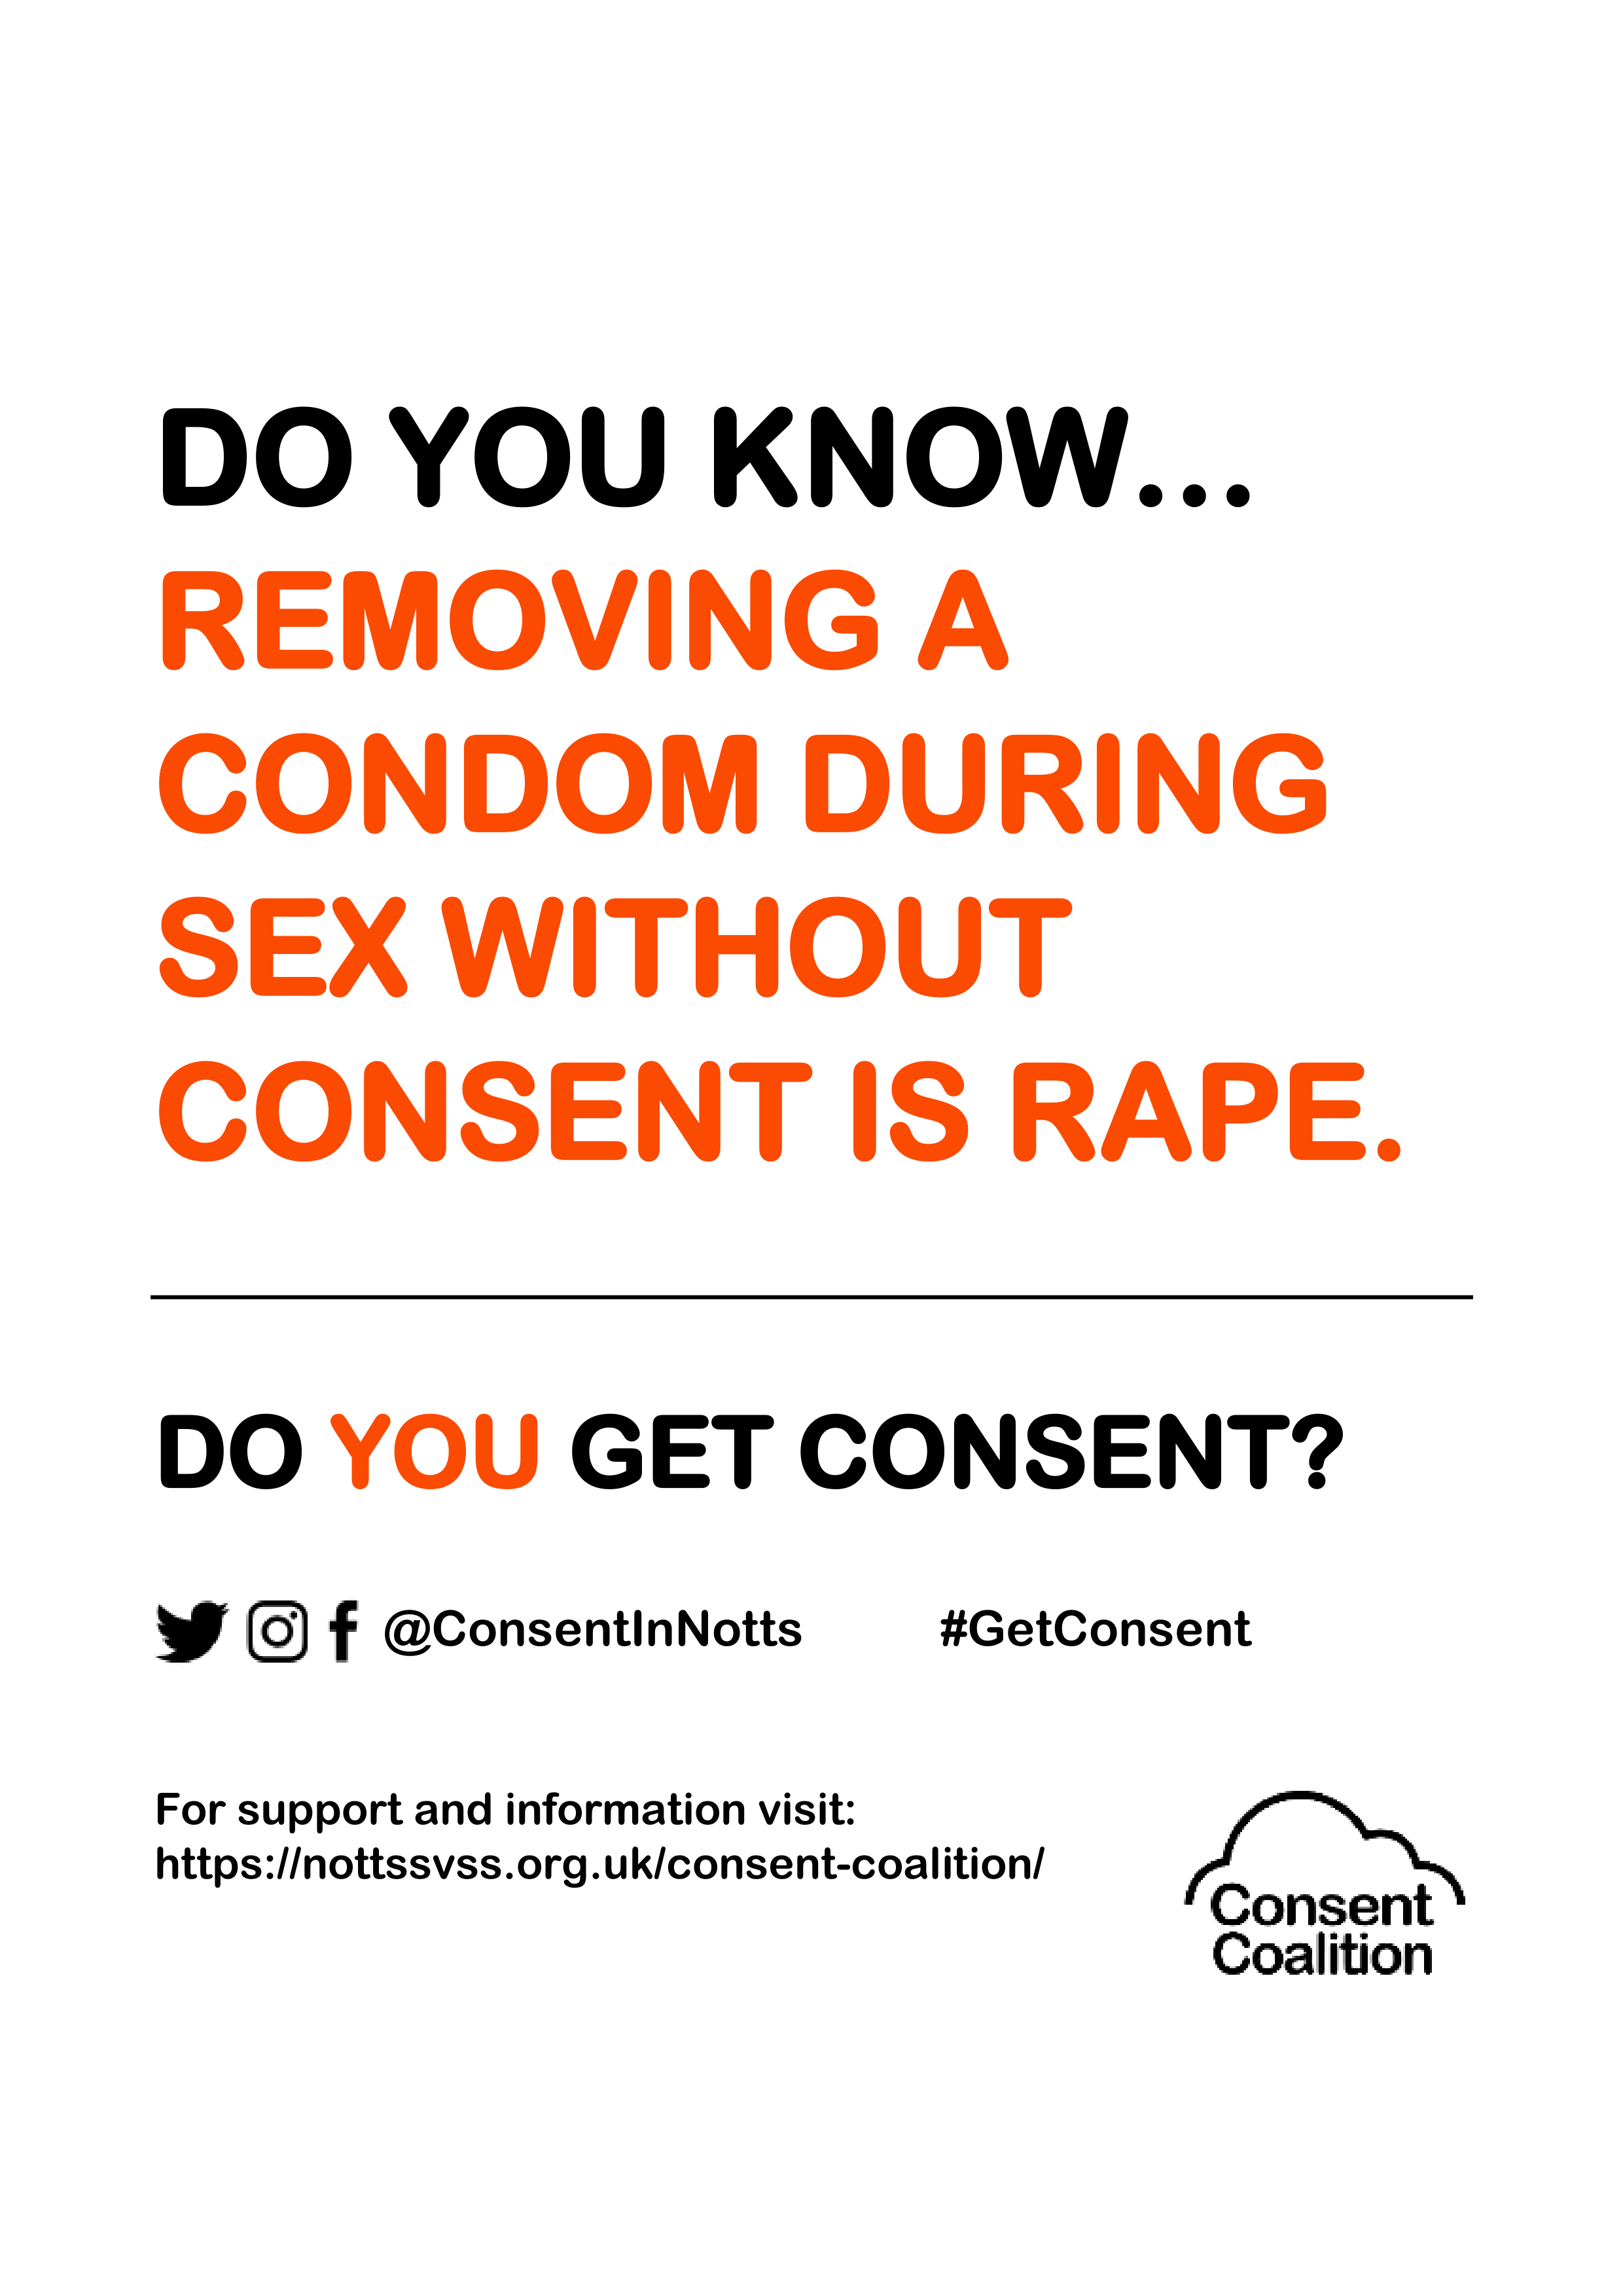 Consent Coalition pic